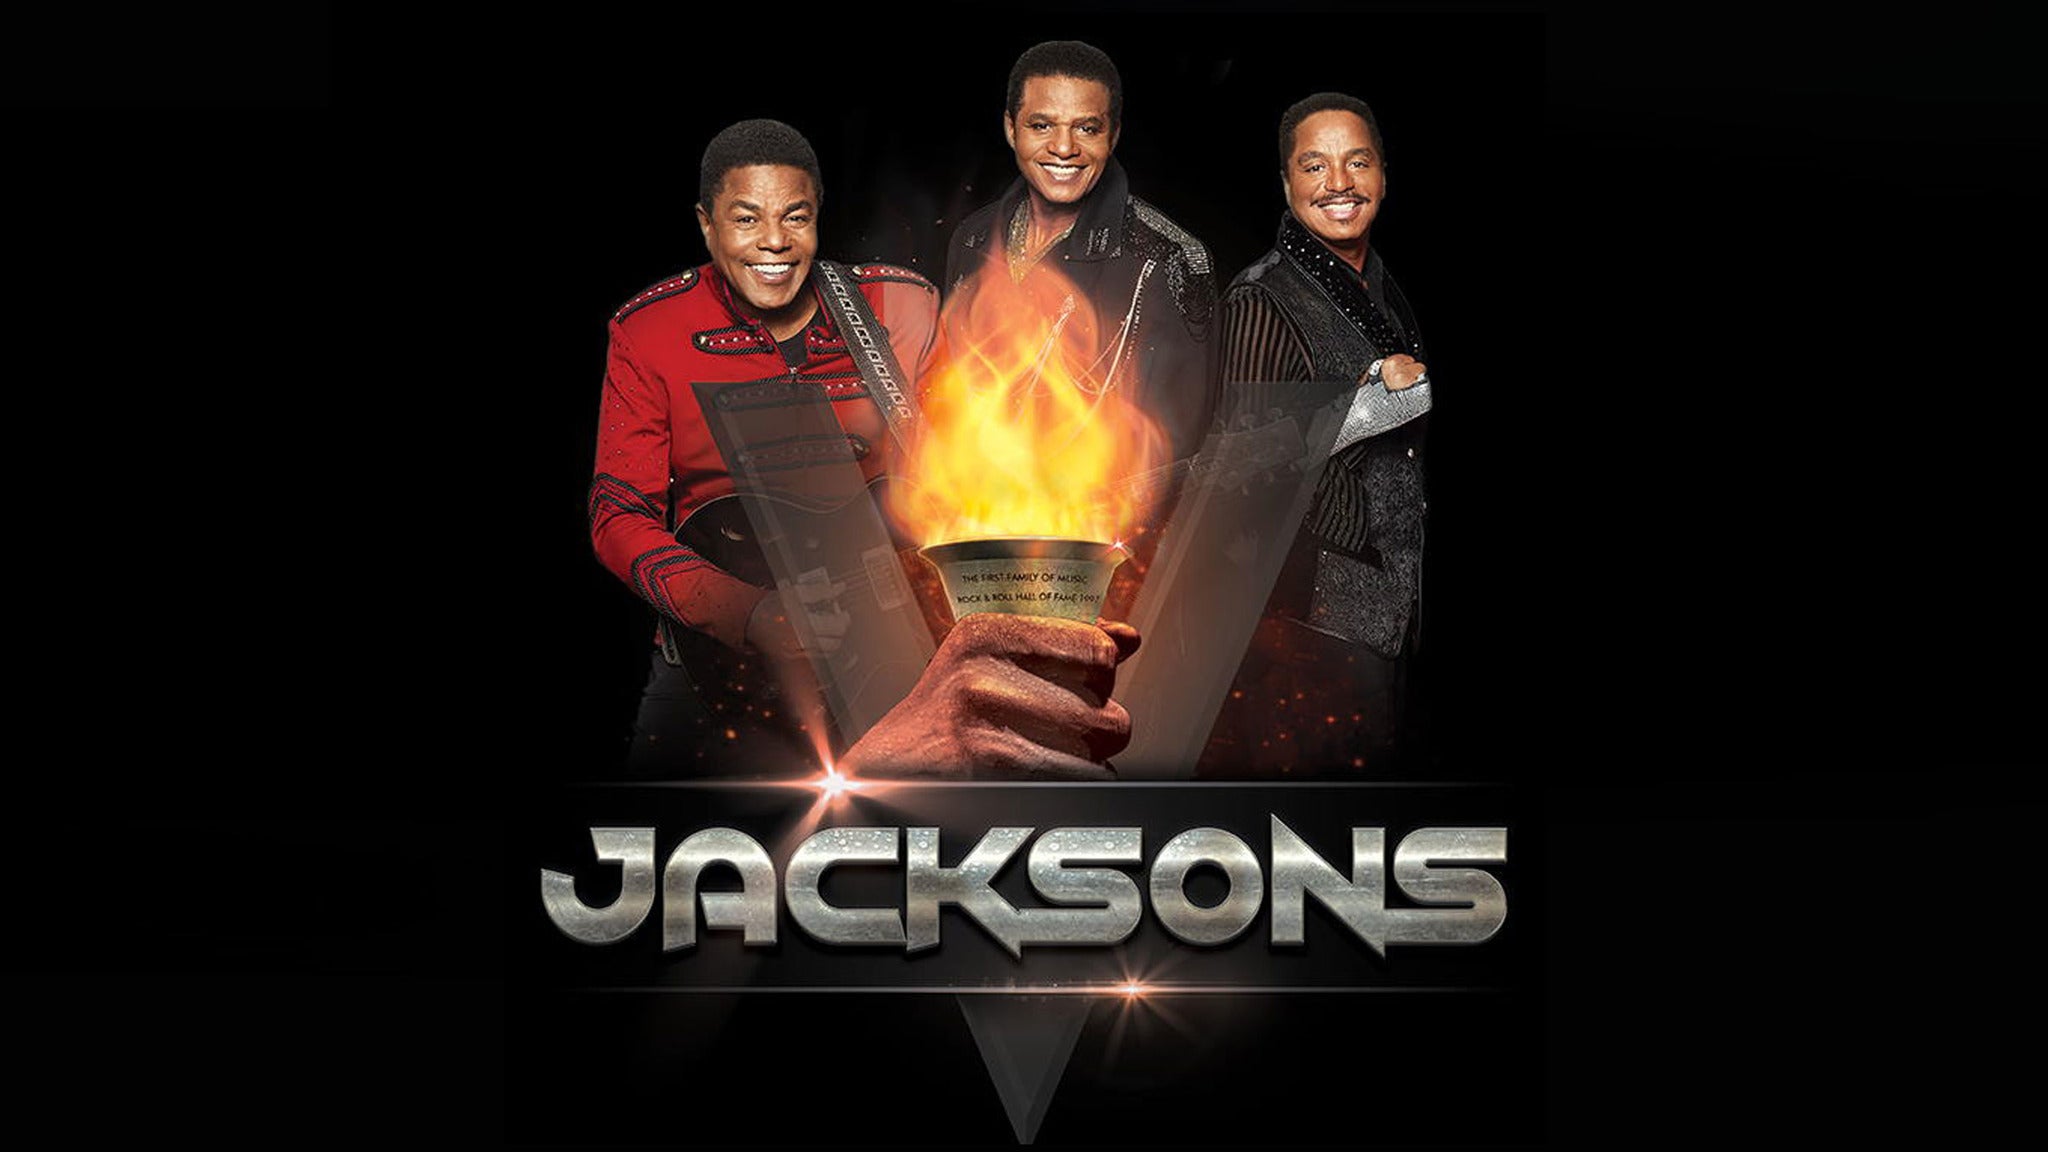 The Jacksons in Tampa promo photo for Official Platinum Onsale presale offer code